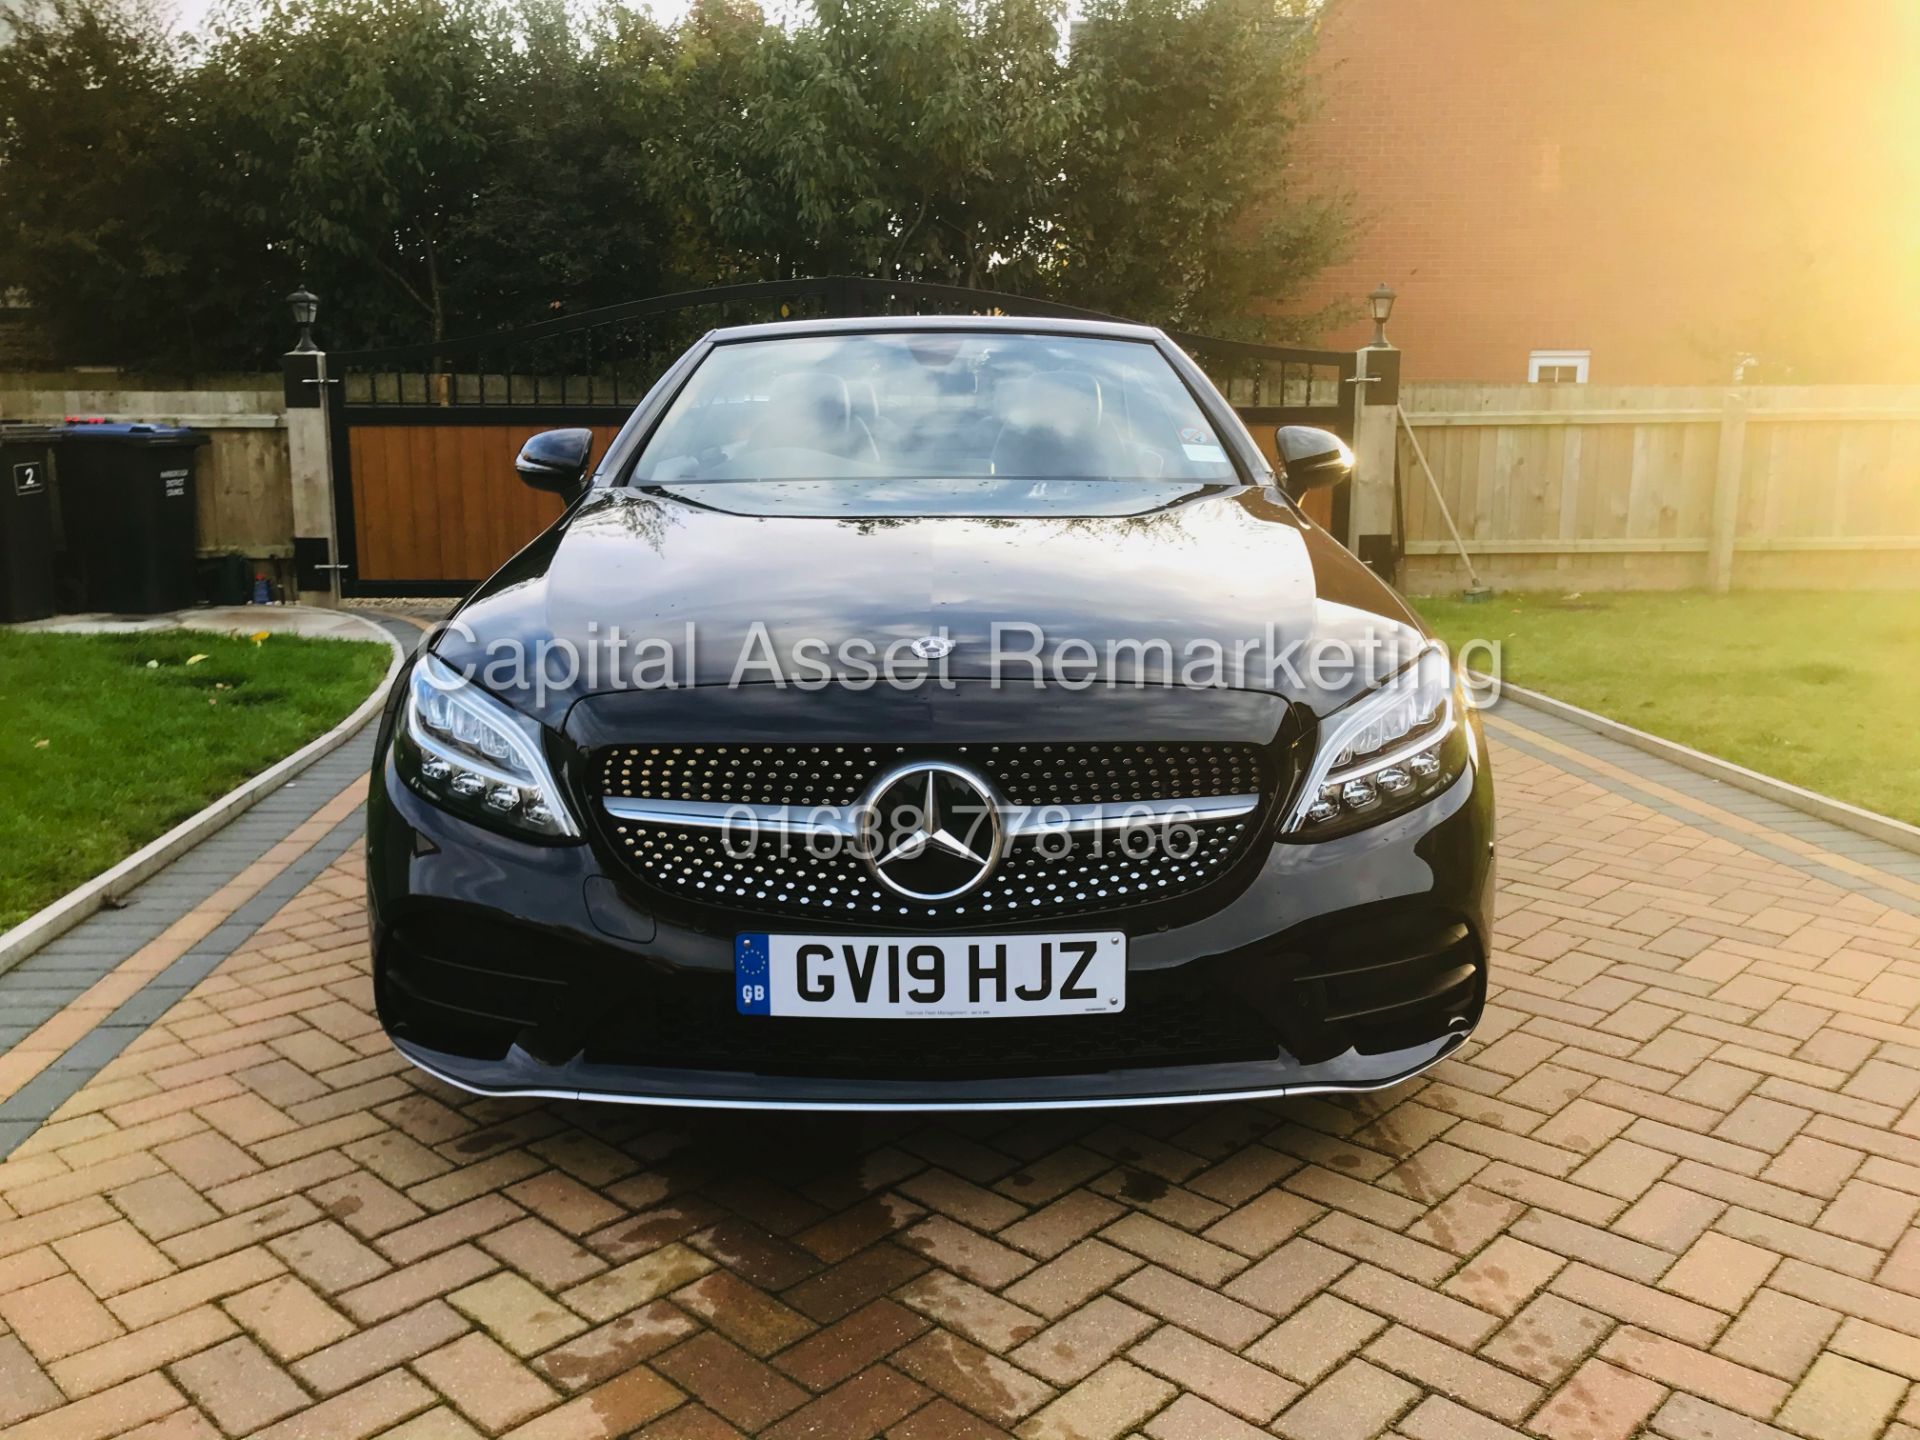 On Sale MERCEDES-BENZ C220d *AMG LINE -CABRIOLET* (2019) '9G TRONIC AUTO - LEATHER - SAT NAV' - Image 4 of 32